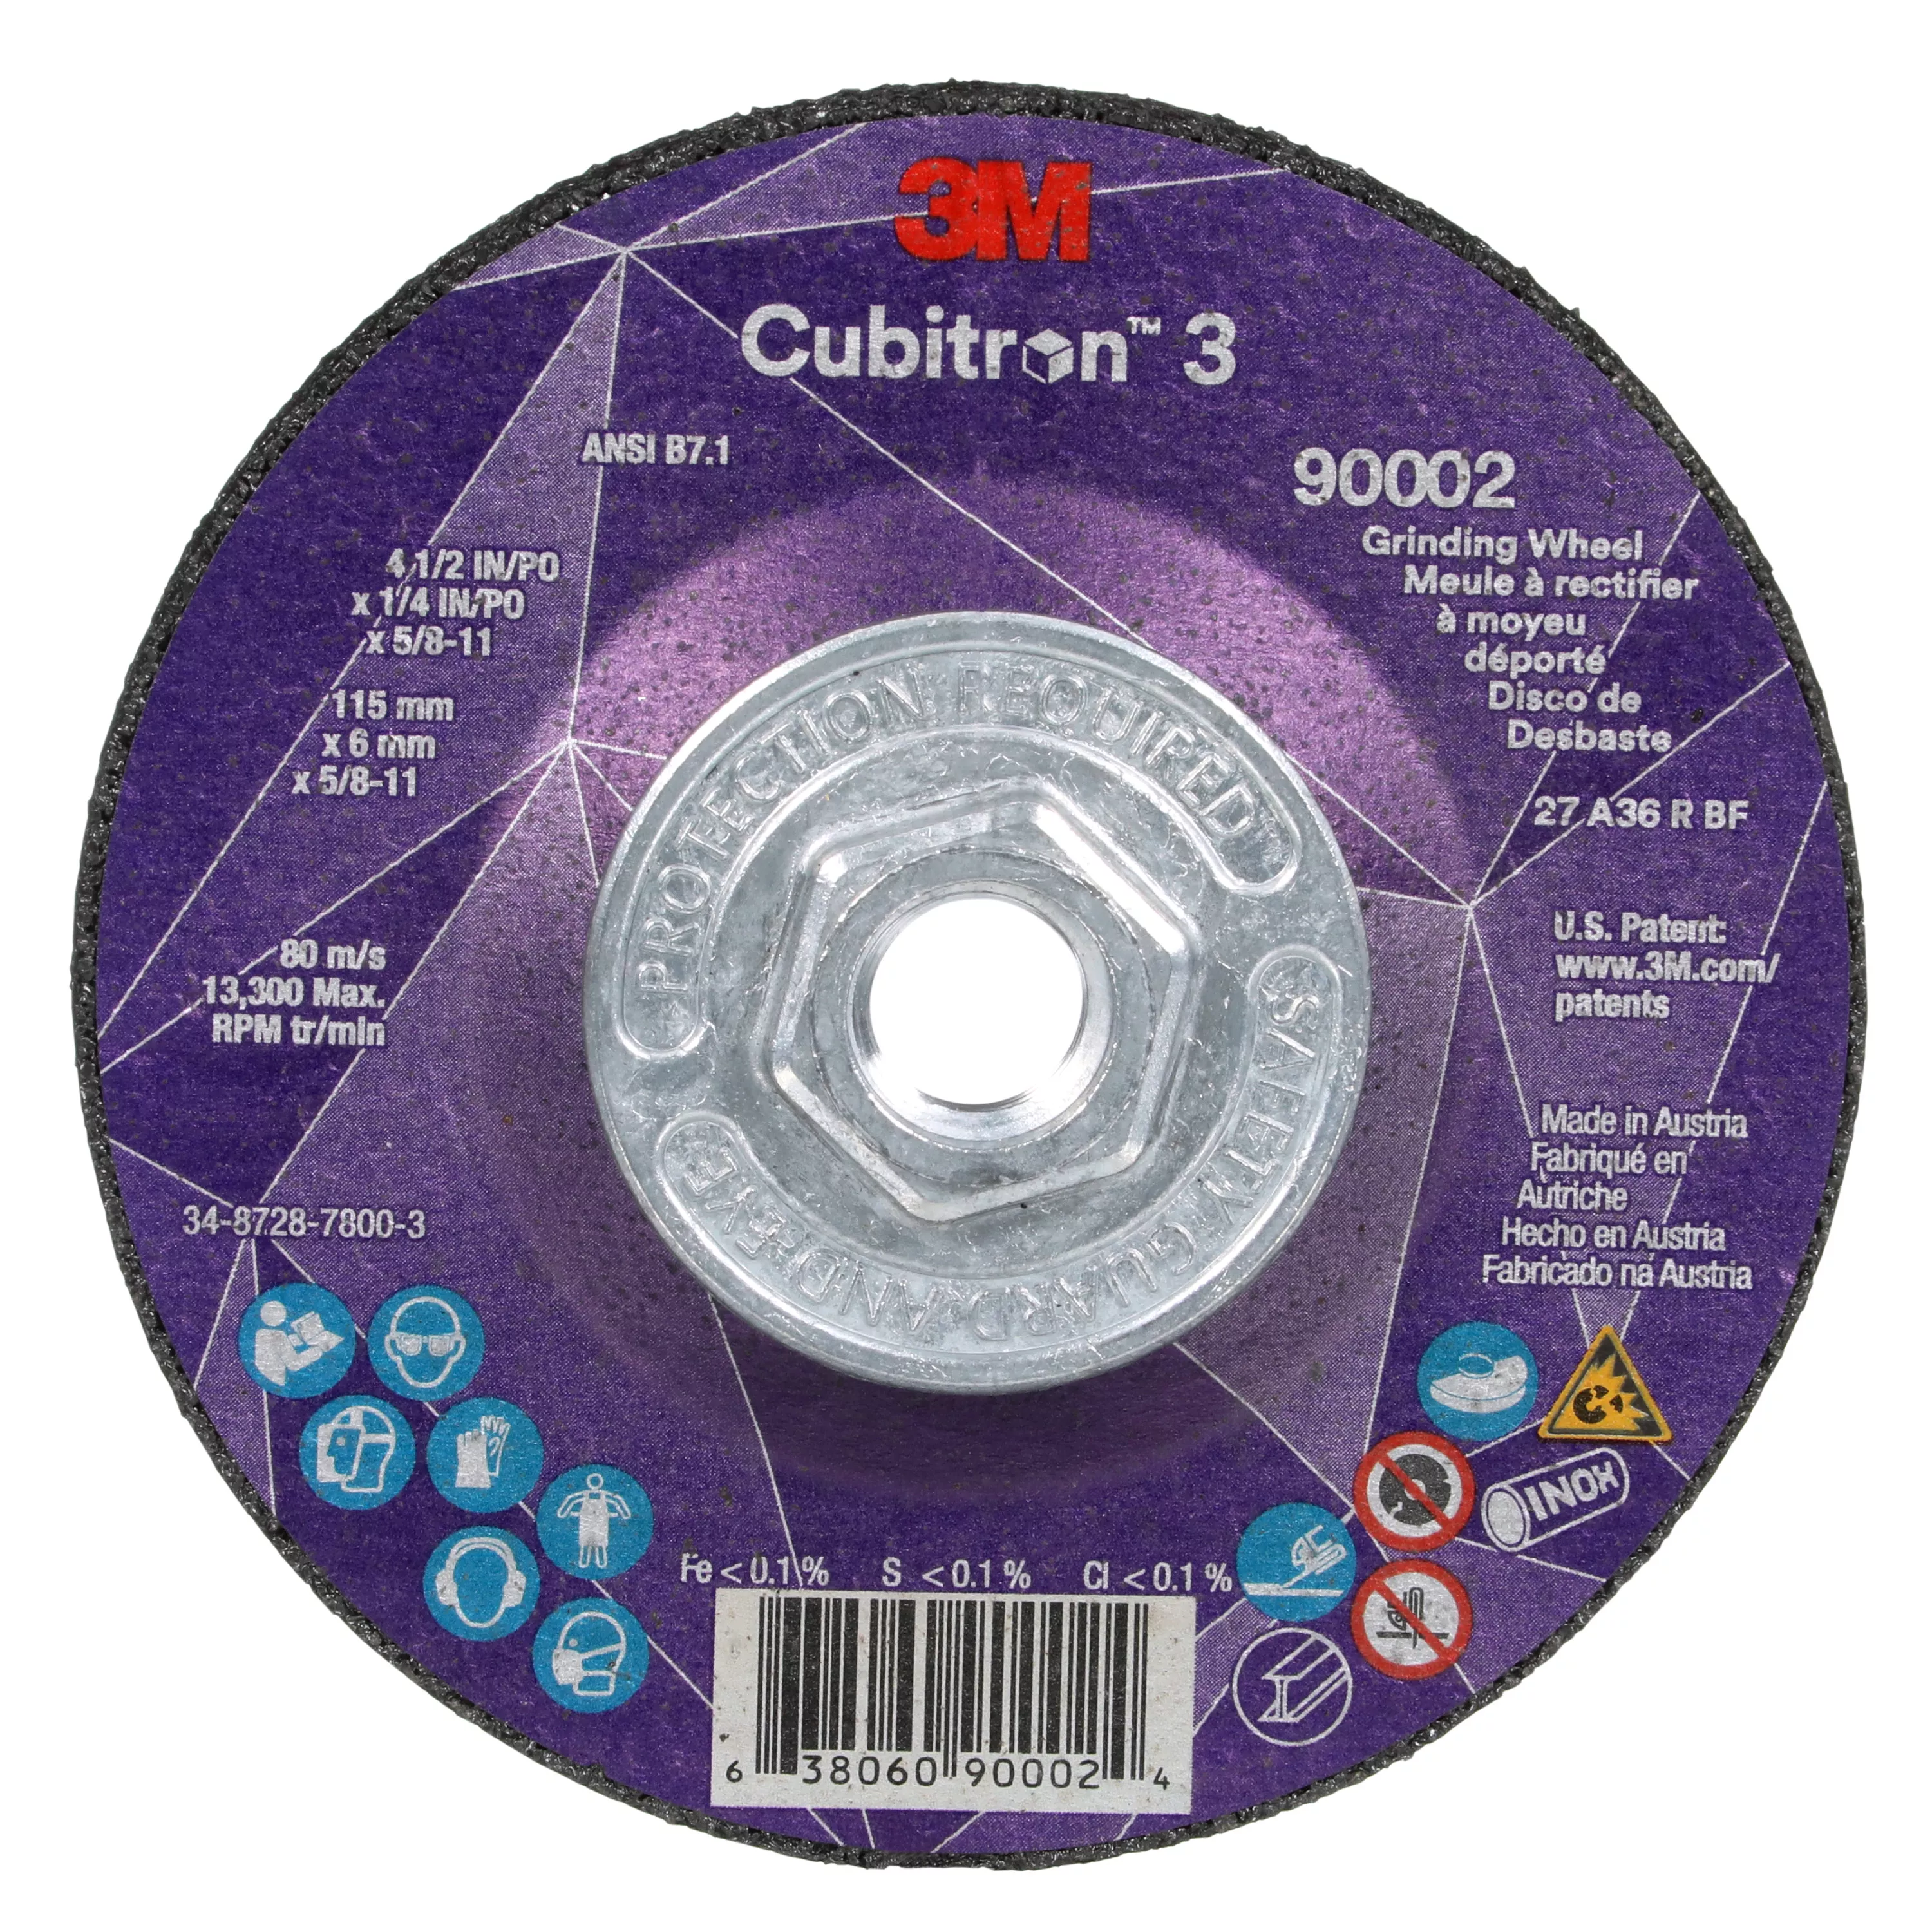 3M™ Cubitron™ 3 Depressed Center Grinding Wheel, 90002, 36+, T27, 4-1/2
in x 1/4 in x 5/8 in-11(115x6mmx5/8-11in) ANSI, 10 ea/Case